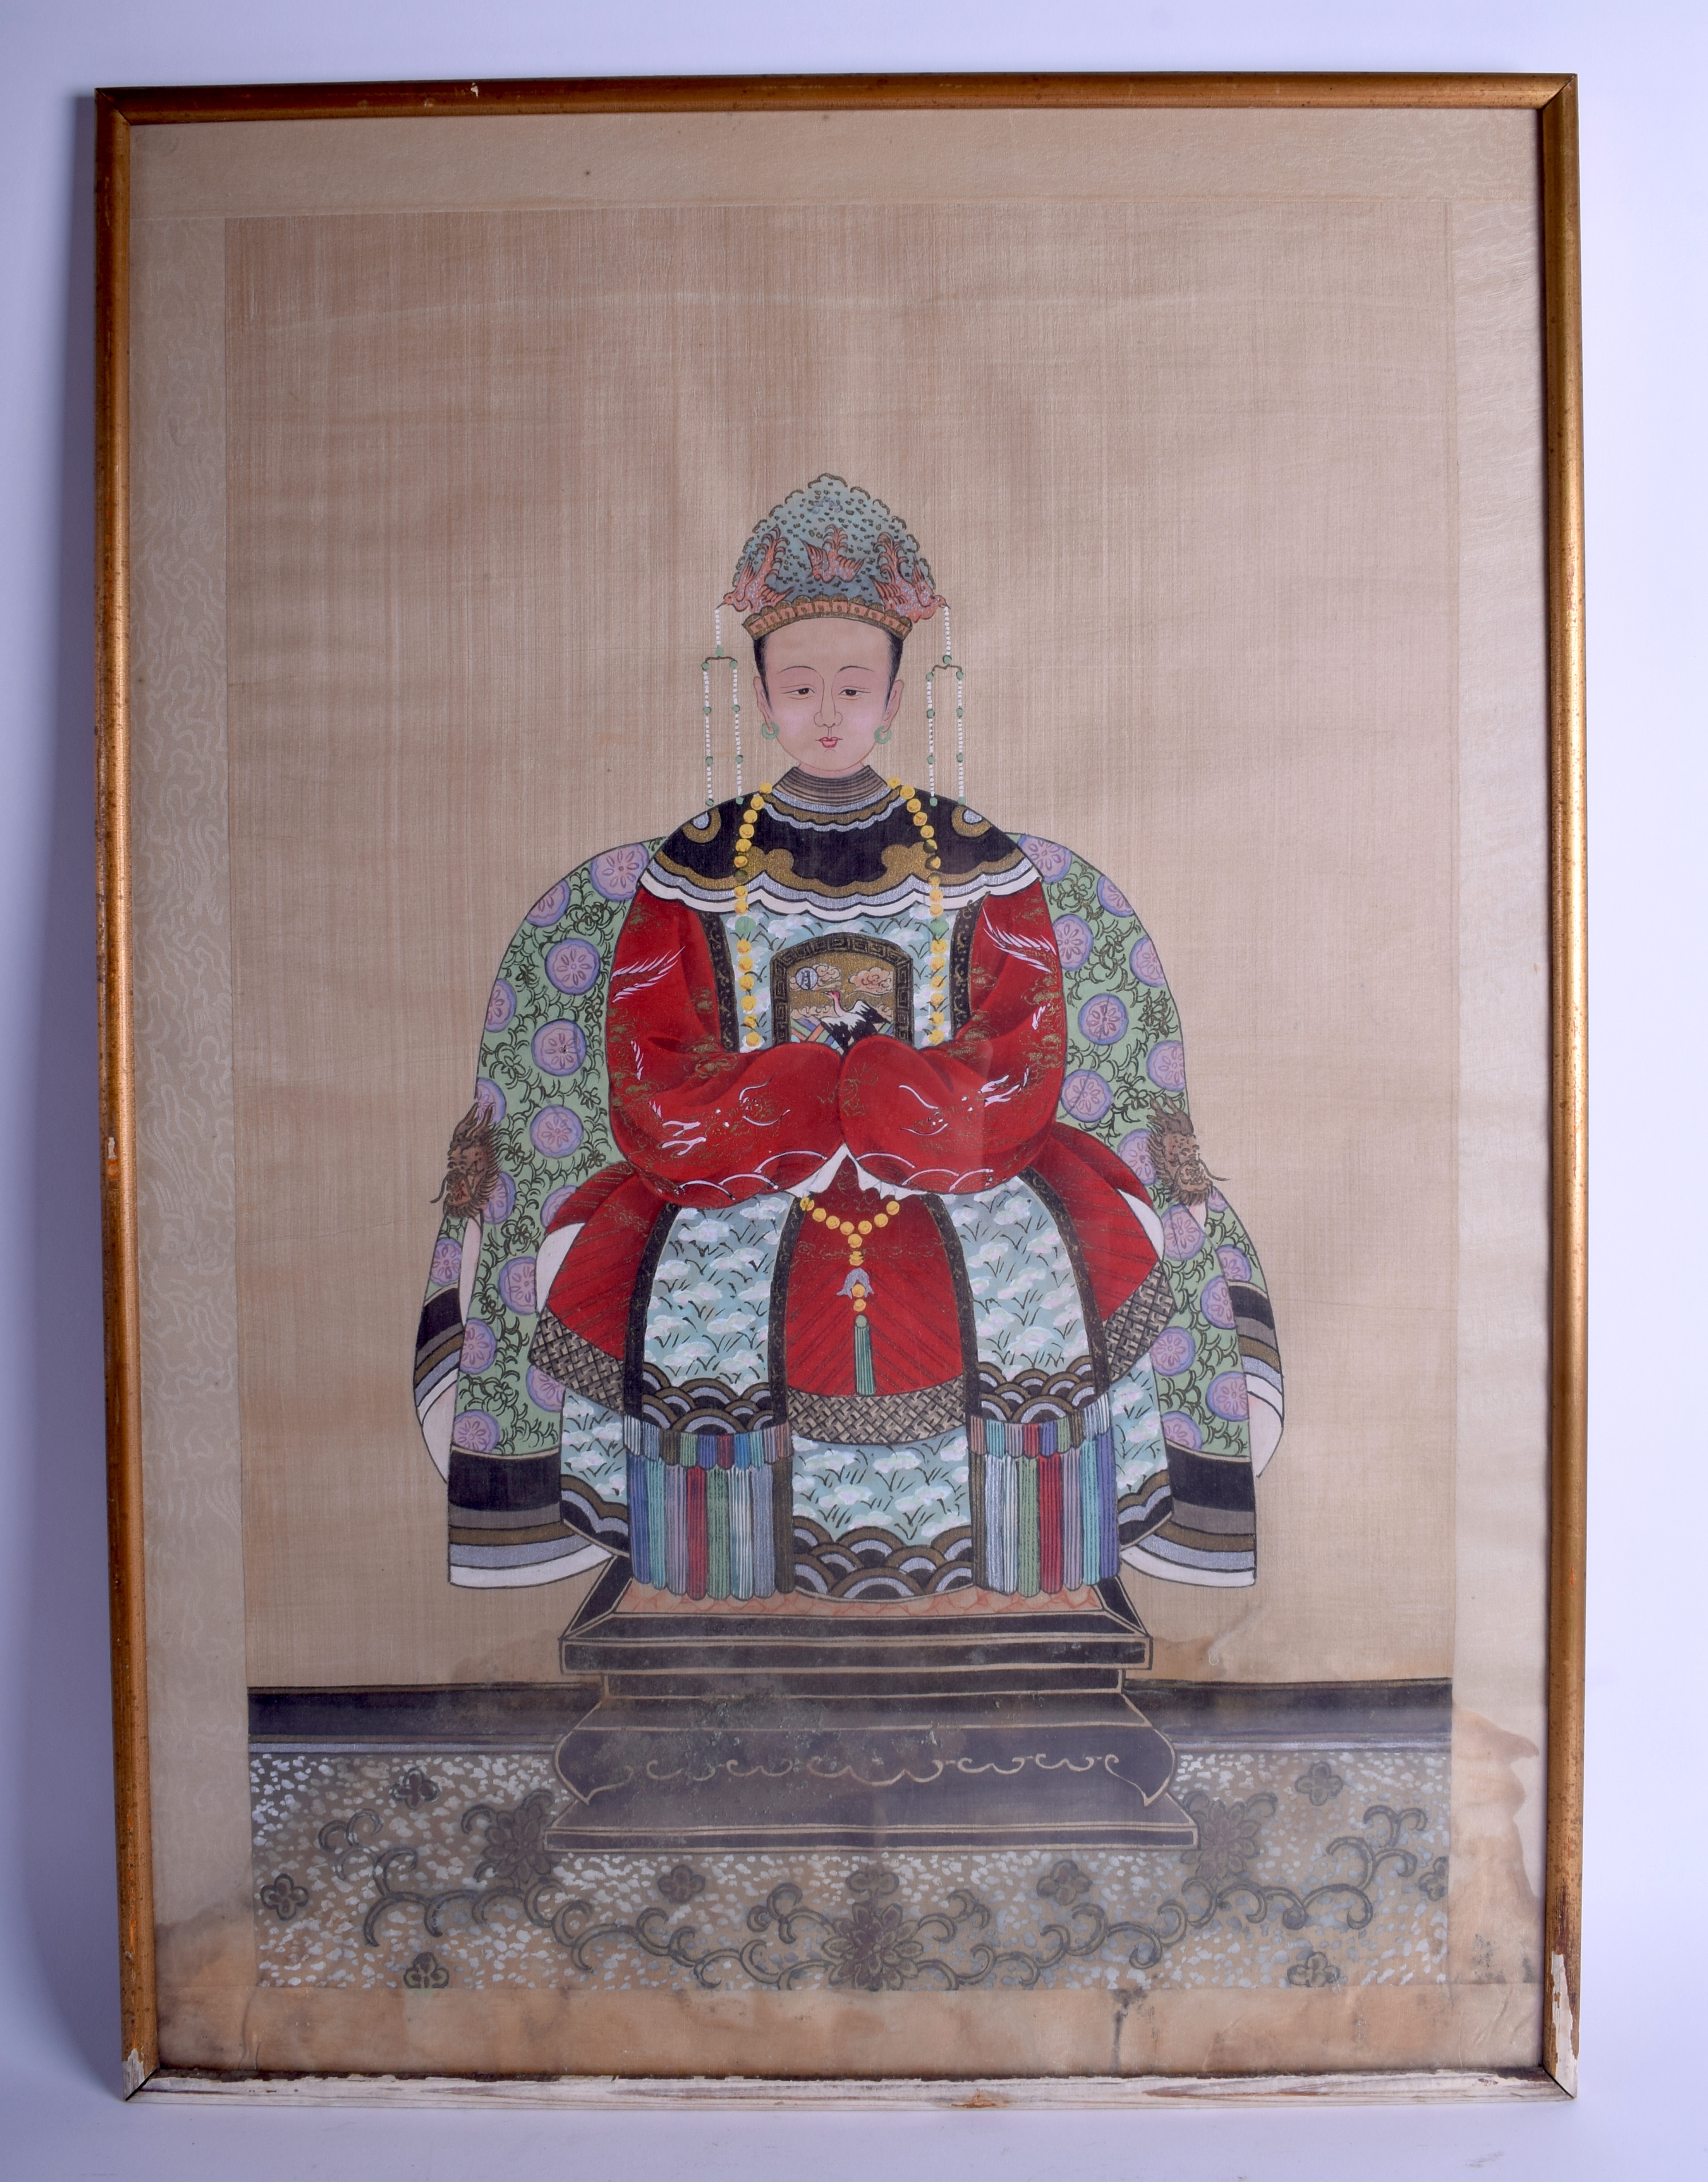 A CHINESE FRAMED ANCESTRAL WATERCOLOUR. Image 68 cm x 40 cm.